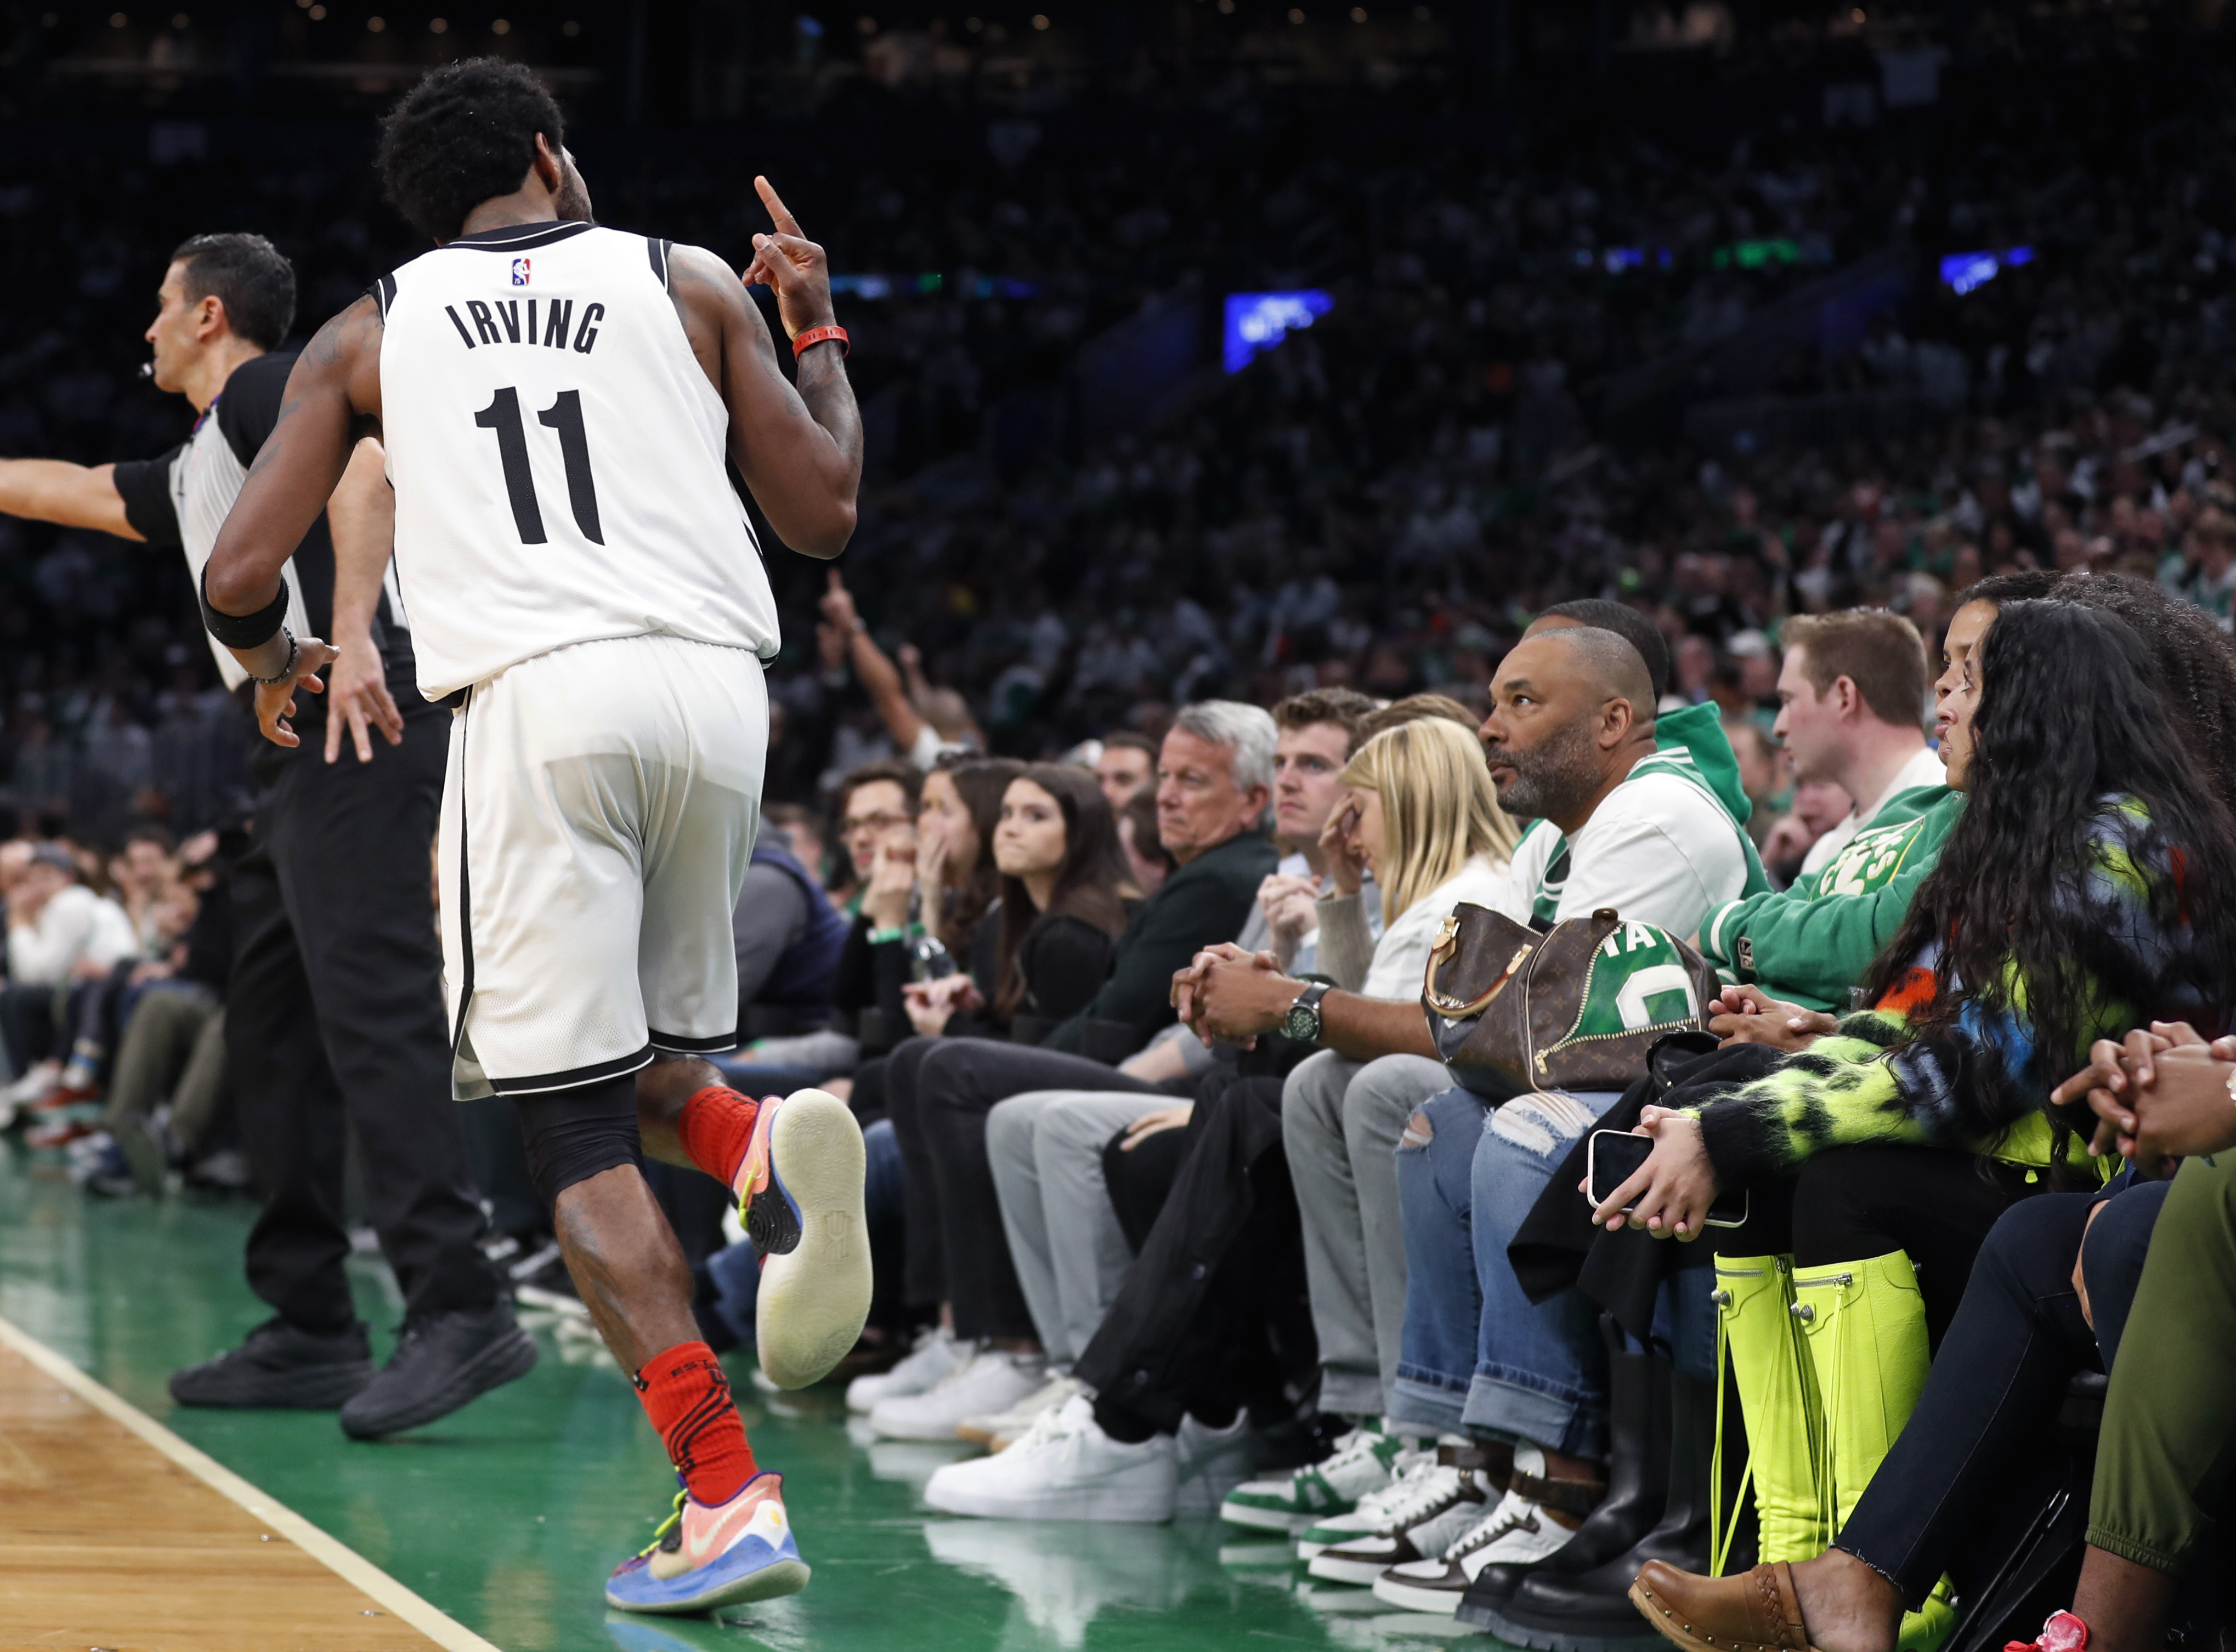 Inside look at Kyrie Irving's chaotic tenure with Nets